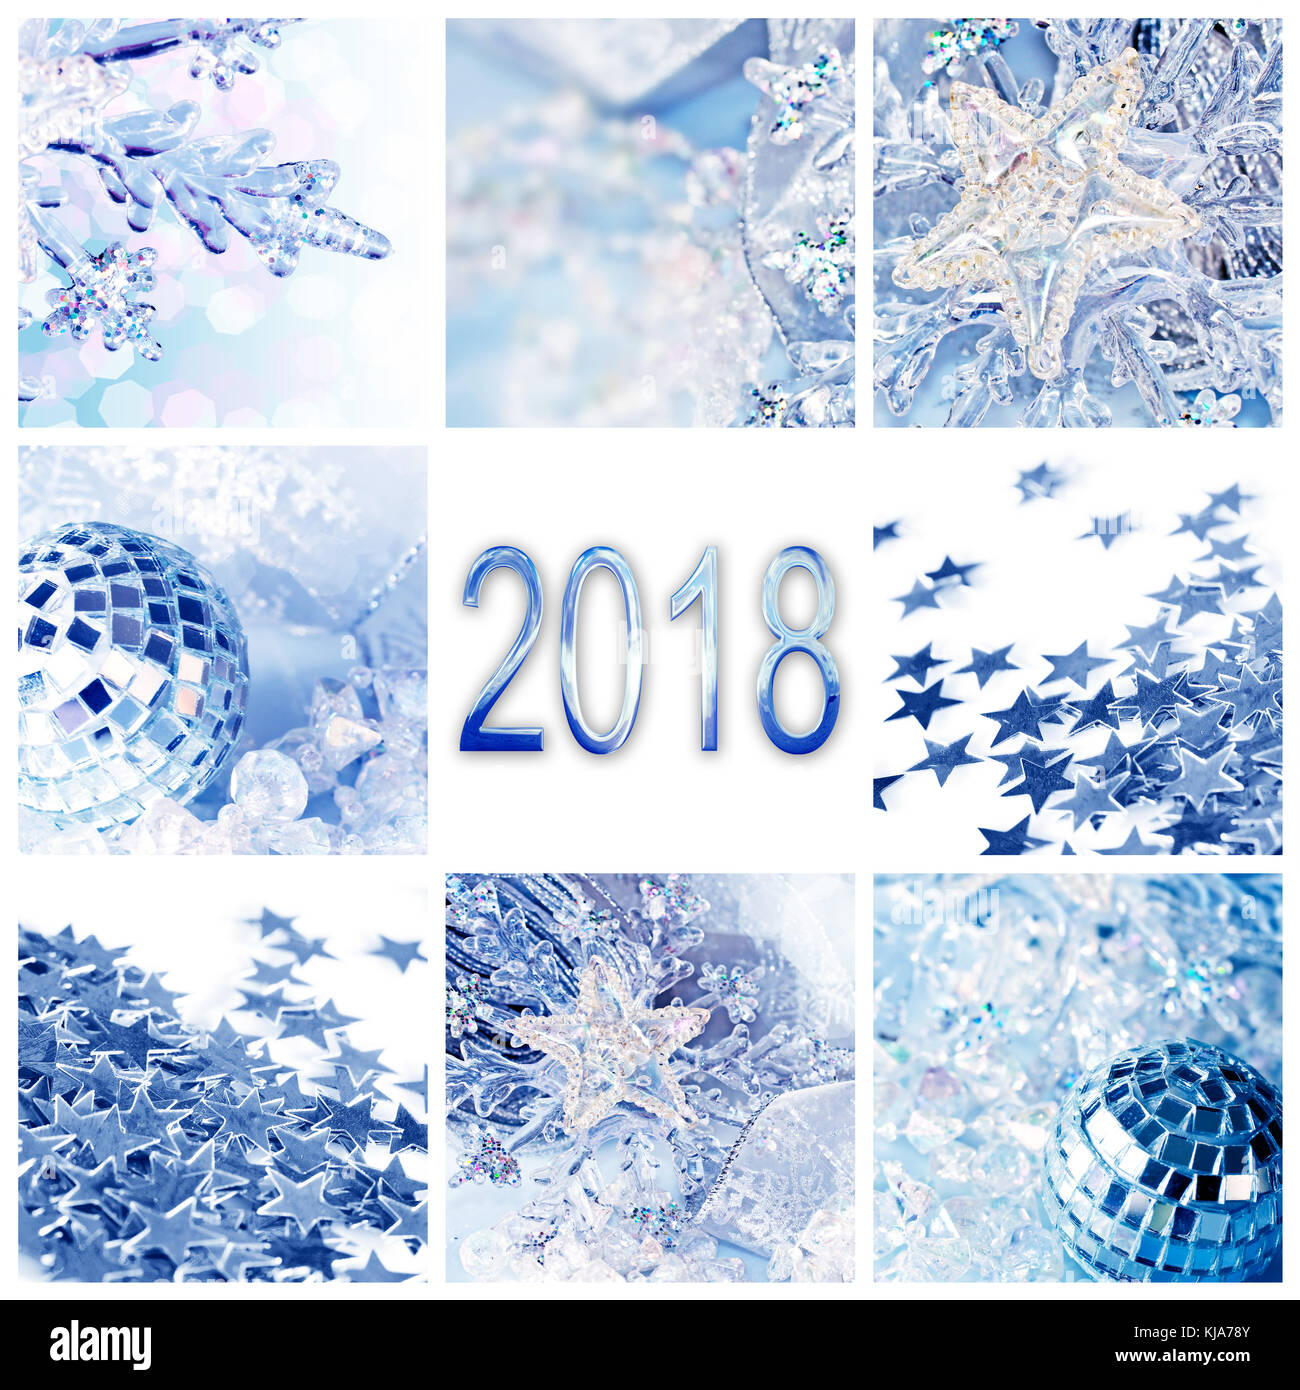 2018, blue christmas ornaments collage square greeting card Stock Photo